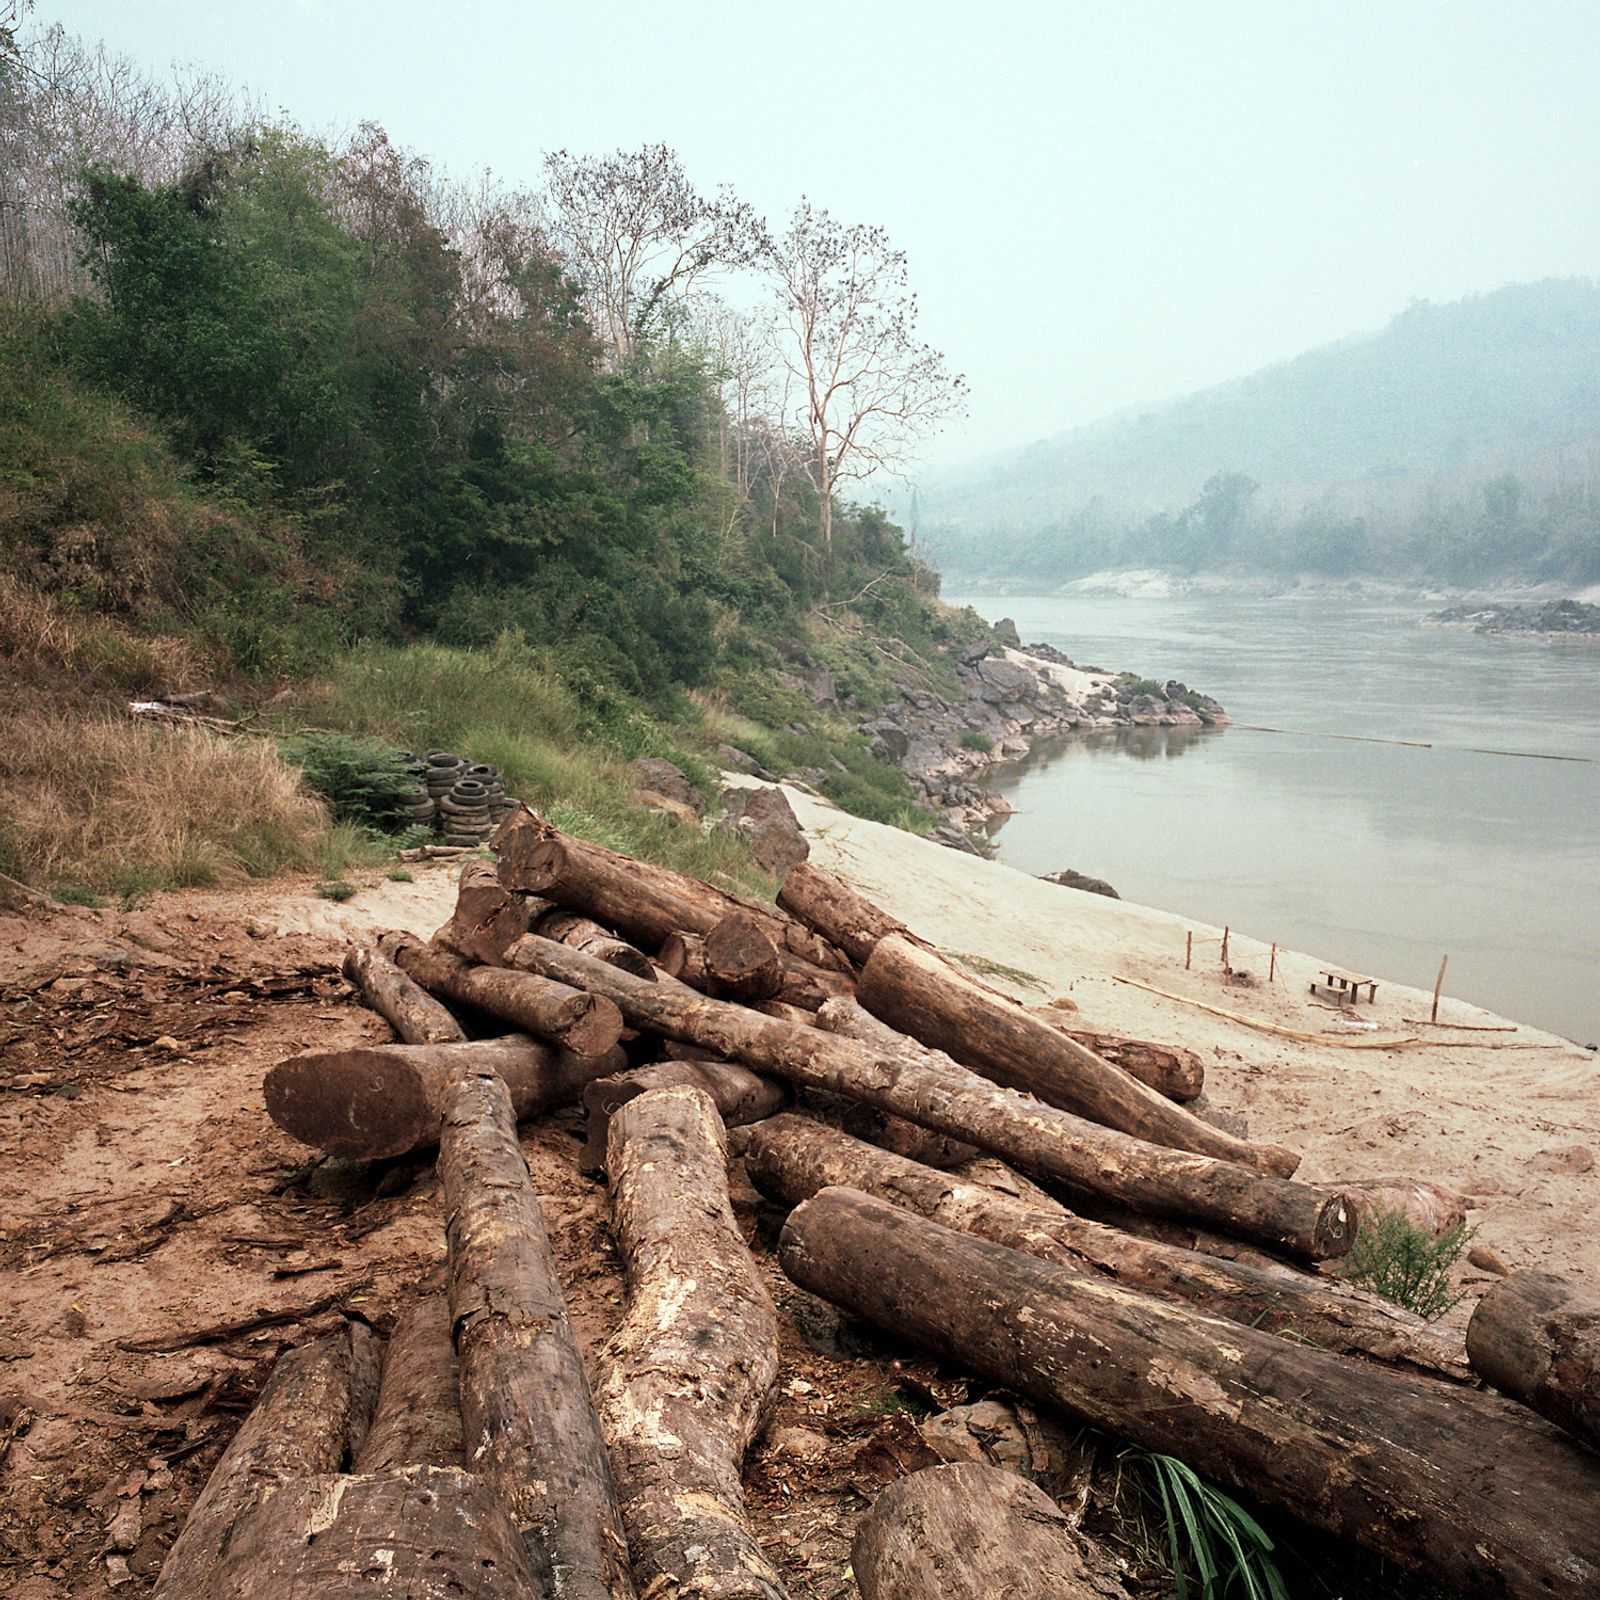 © Huiying Ore - Loggers in Laos make use of the Mekong River to transport felled trees from remote areas of the forest.